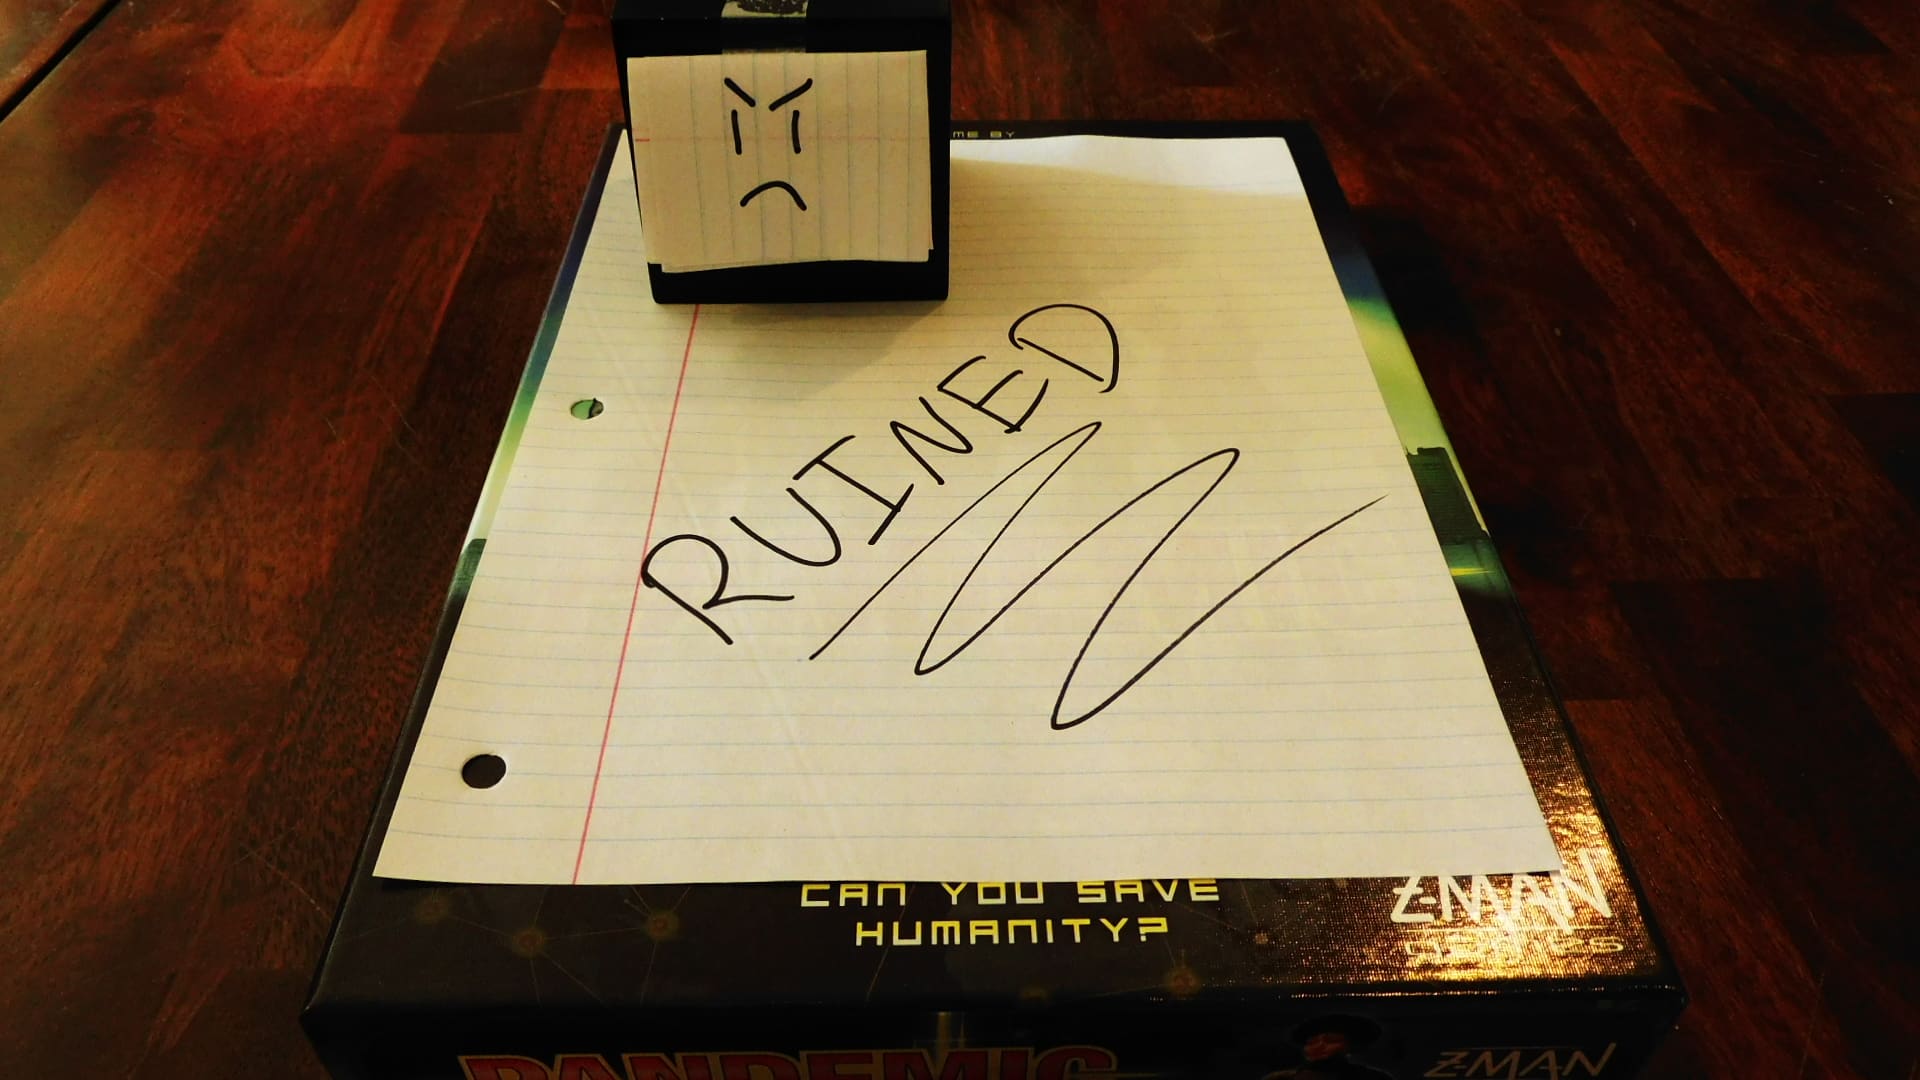 Alpha Gamer Al sitting on a piece of paper that says "Ruined," which is on top of a board game.